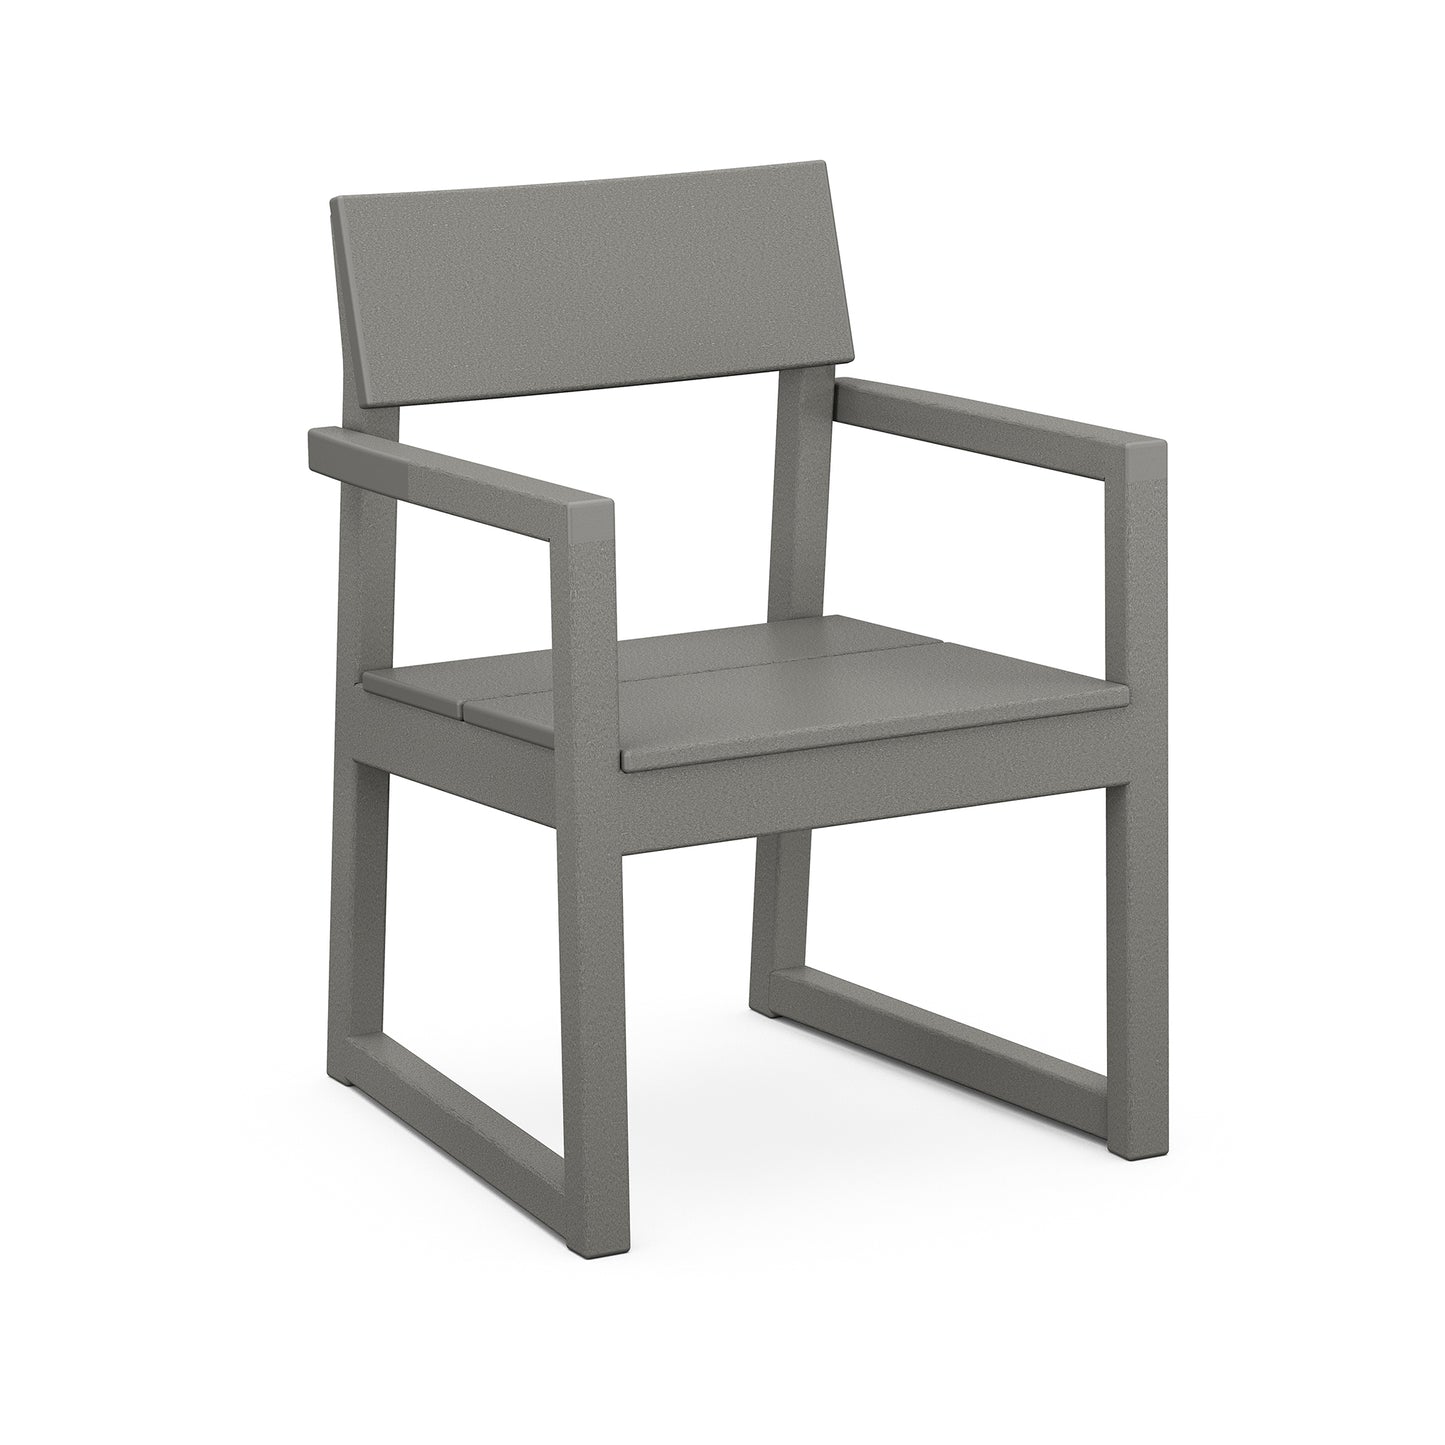 3D rendering of a modern, gray outdoor dining chair with a minimalist design, featuring straight lines and square shapes, constructed from POLYWOOD lumber, isolated on a white background.